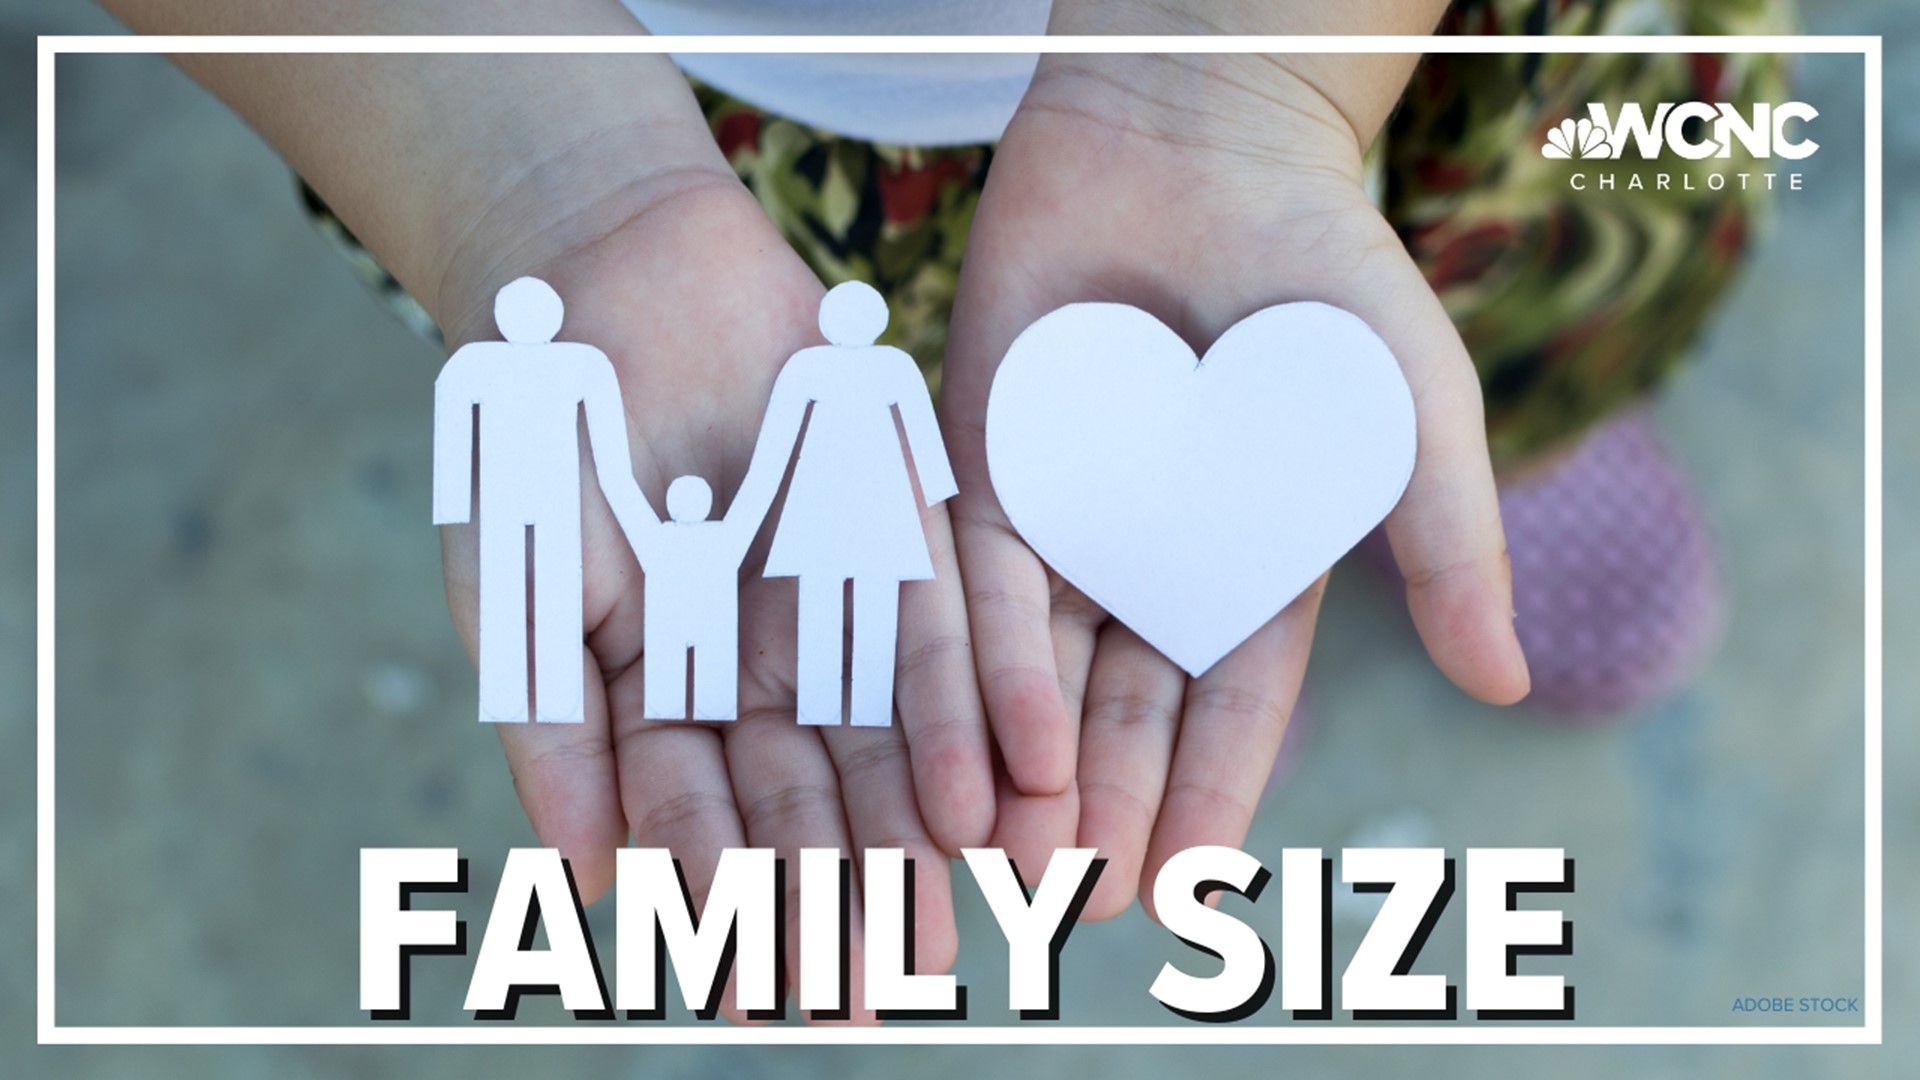 According to new analysis from the National Center for Health Statistics, families are getting smaller.